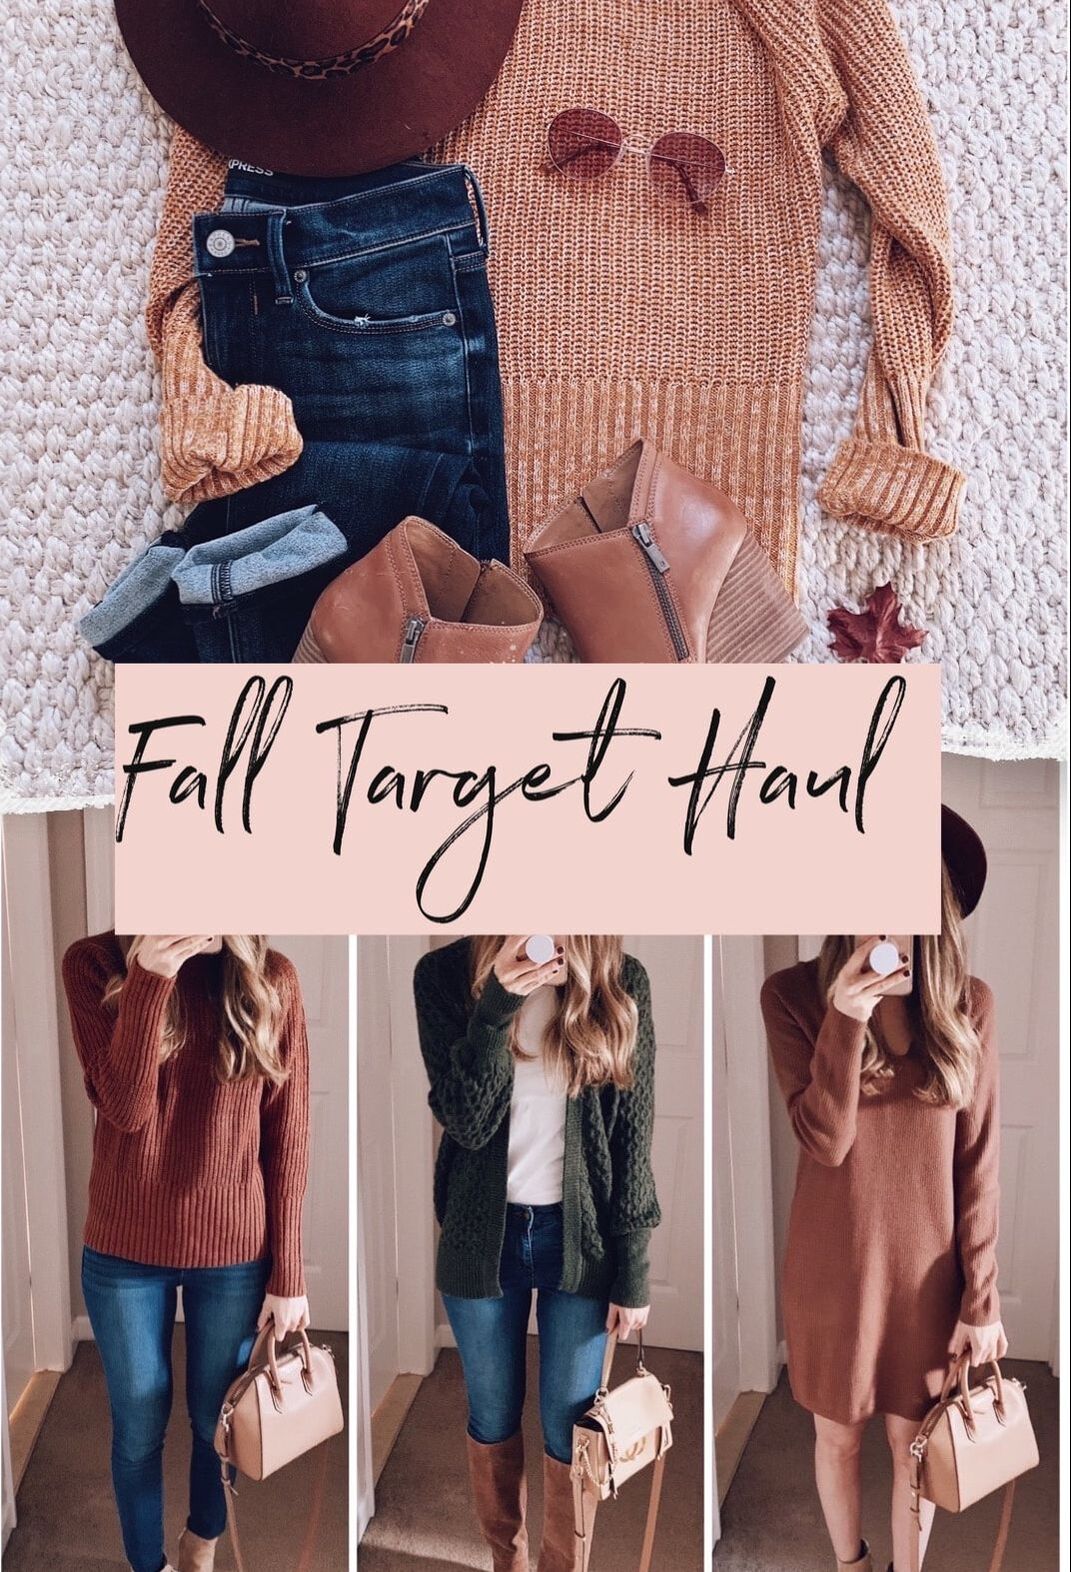 Target Fall Clothing Haul: The Best Fall Pieces & Affordable